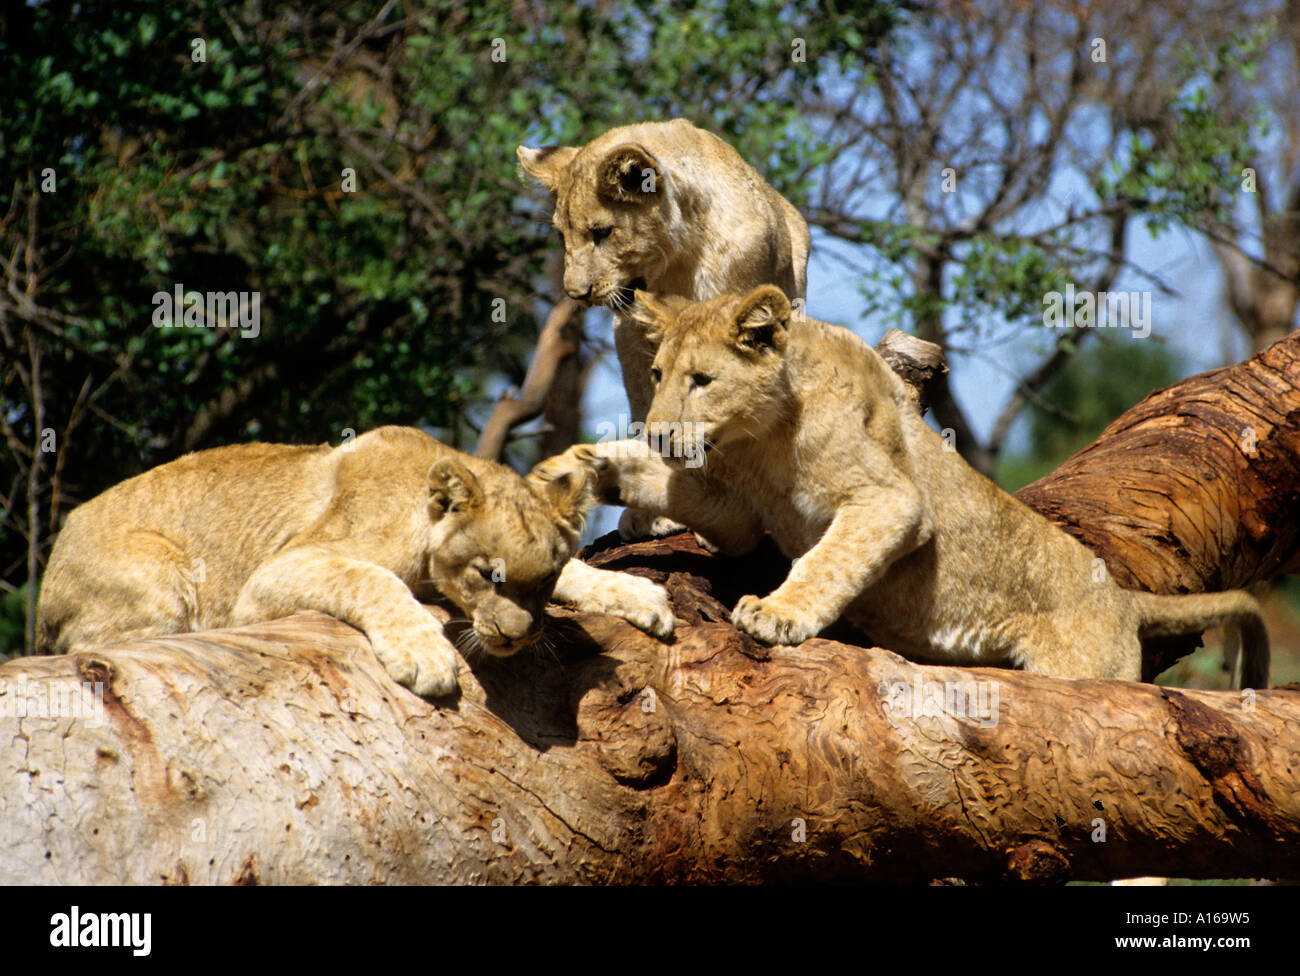 Baby Lions Small Little Lion Lions South Africa Kruger Park Group family Stock Photo